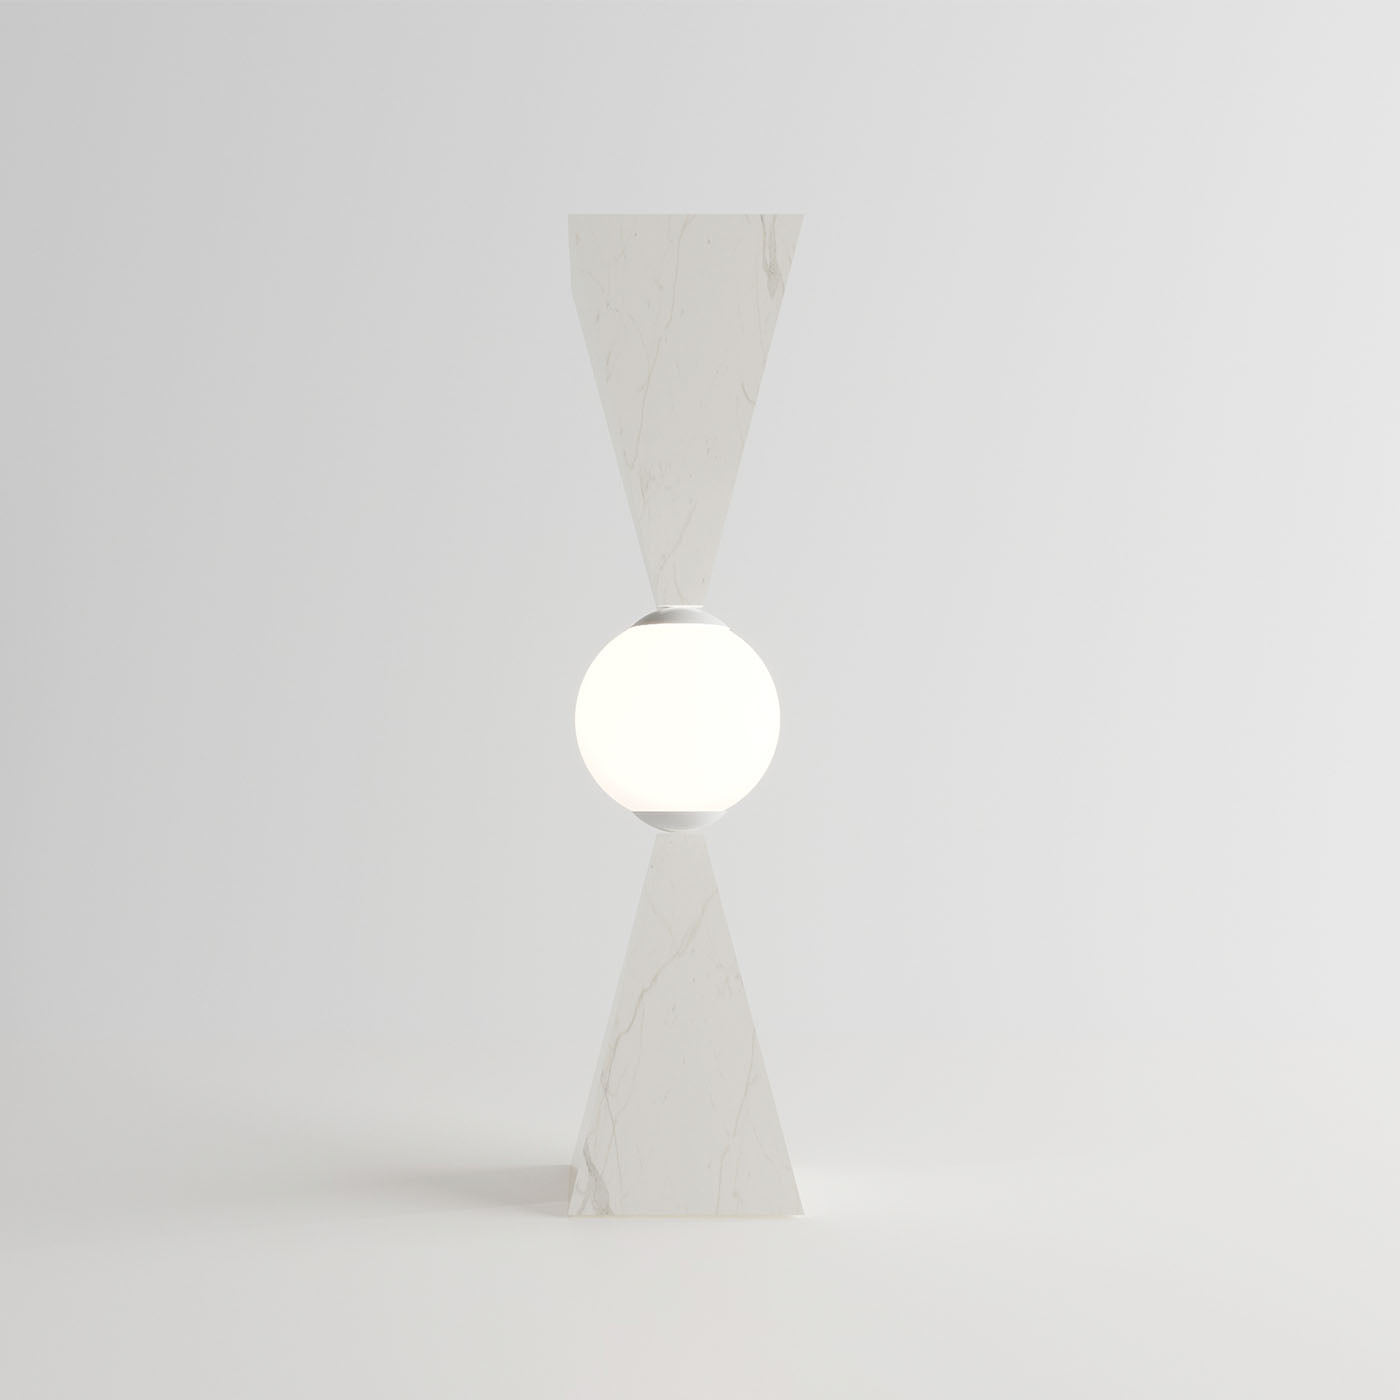 Clessidra Table Lamp in Gold Calacatta Marble by sid&sign - Alternative view 5